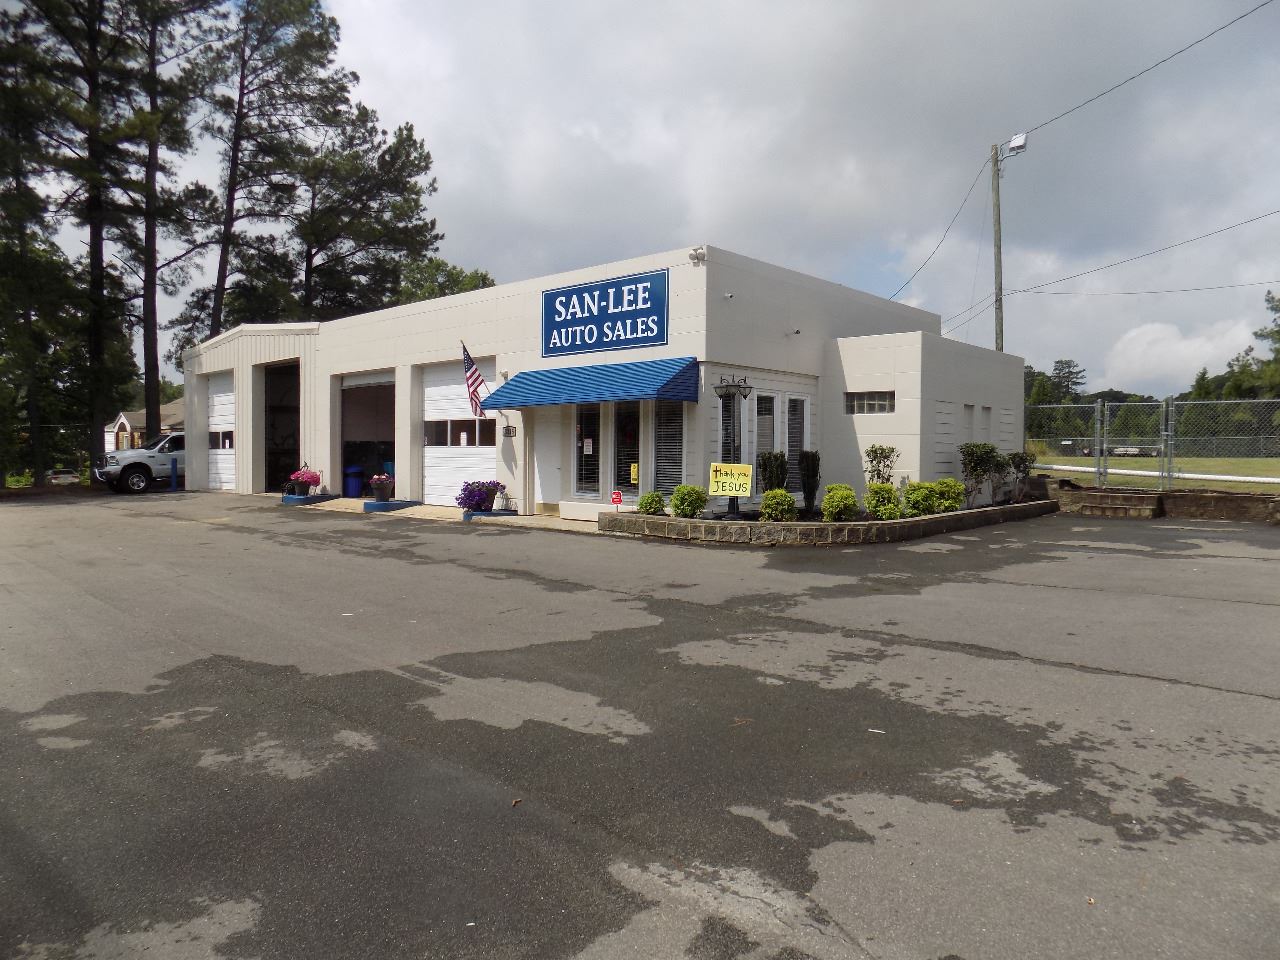 About San-Lee Auto Sales in Sanford, NC